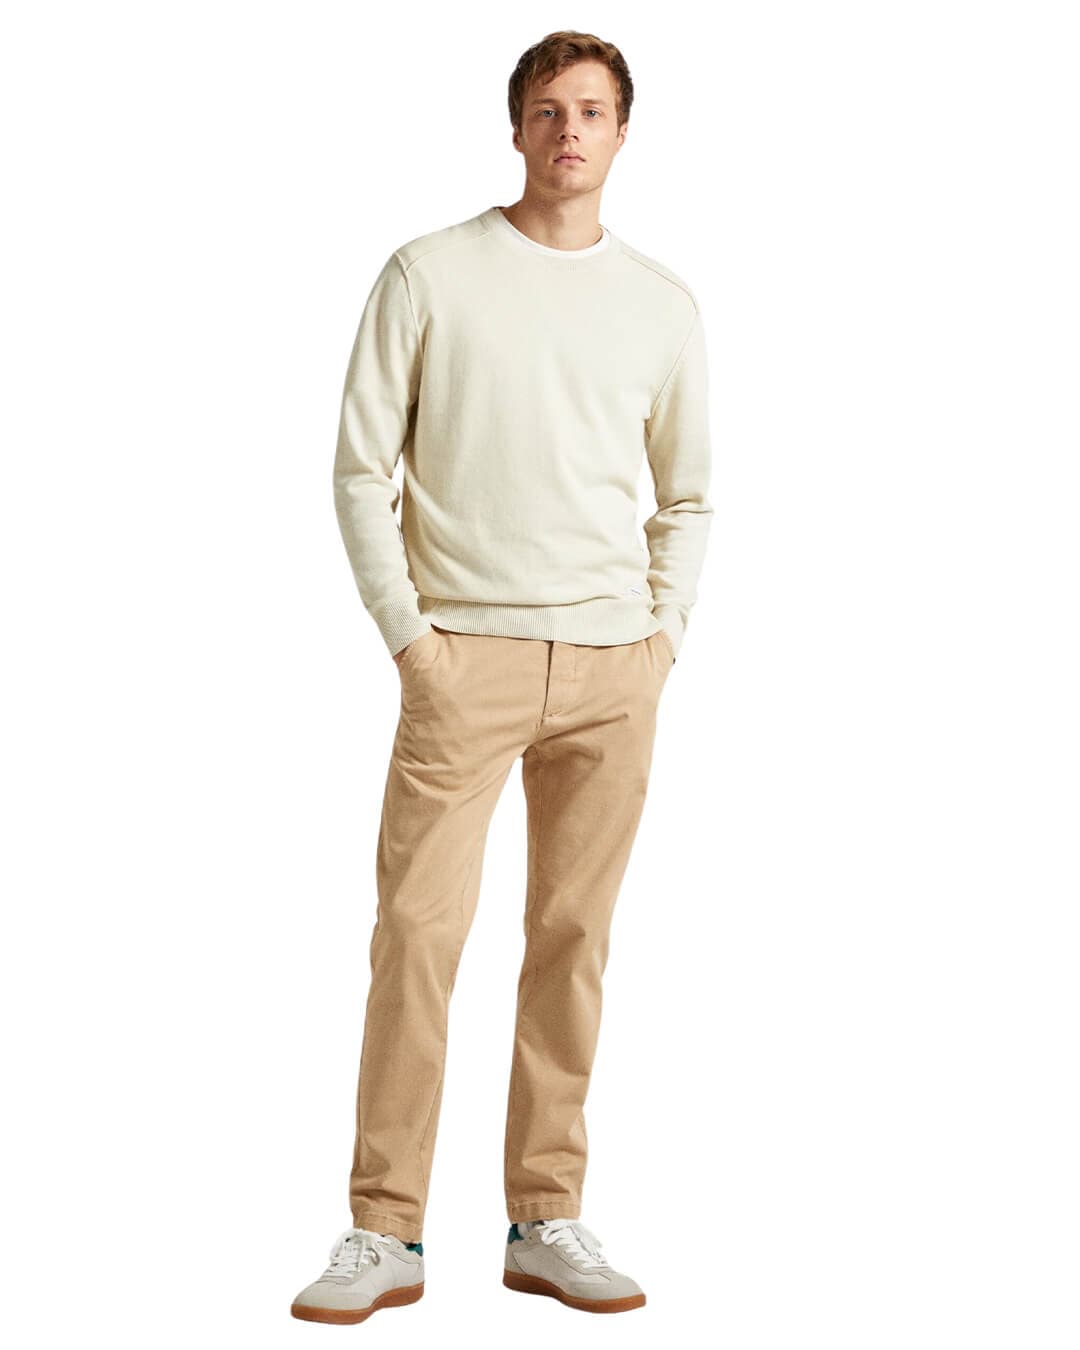 Pepe Jeans Trousers Pepe Jeans Beige Slim Fit Twill Chinos